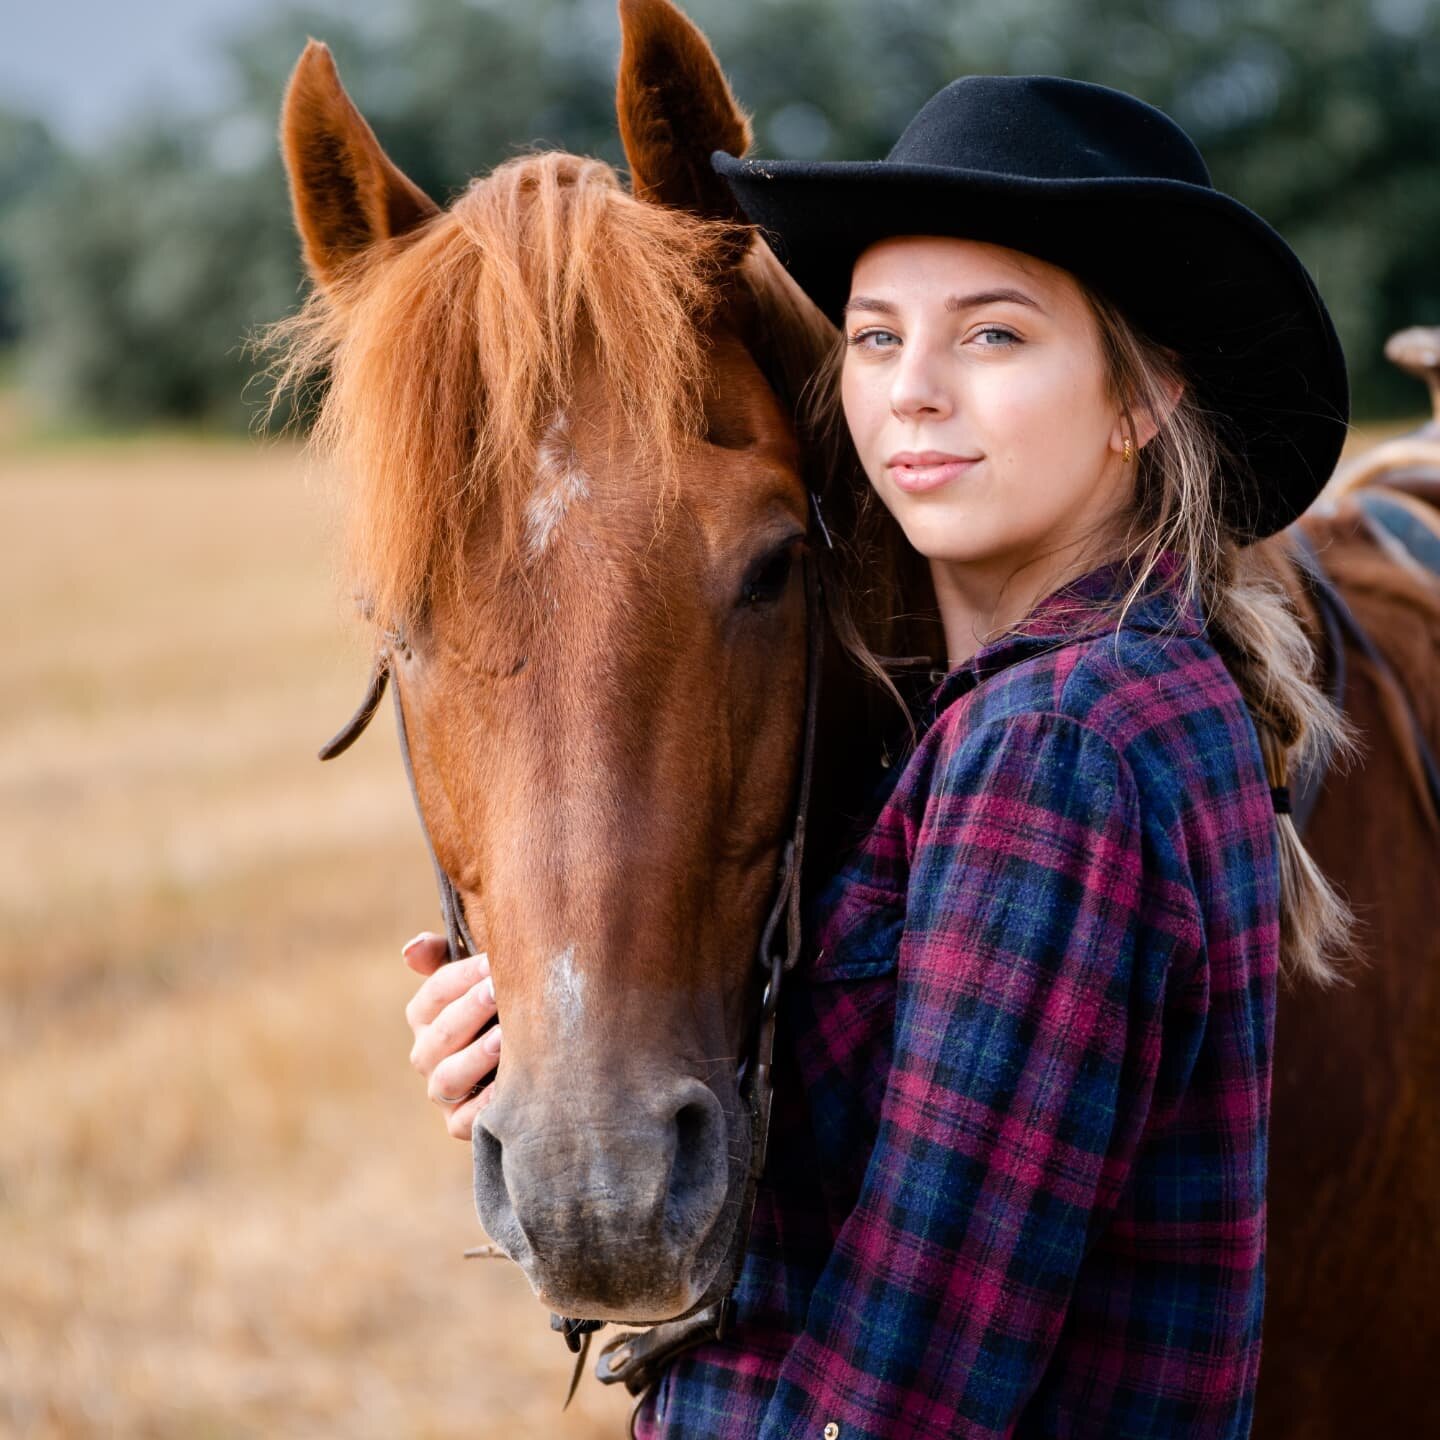 Howdy partner, how is everybody doing? This is a shoot I did last summer with @emiliadonckers had so much fun, another fun fact is the first time I ever did a shoot with a horse what do you think?
If you're interested in a shoot let me know in my dm!